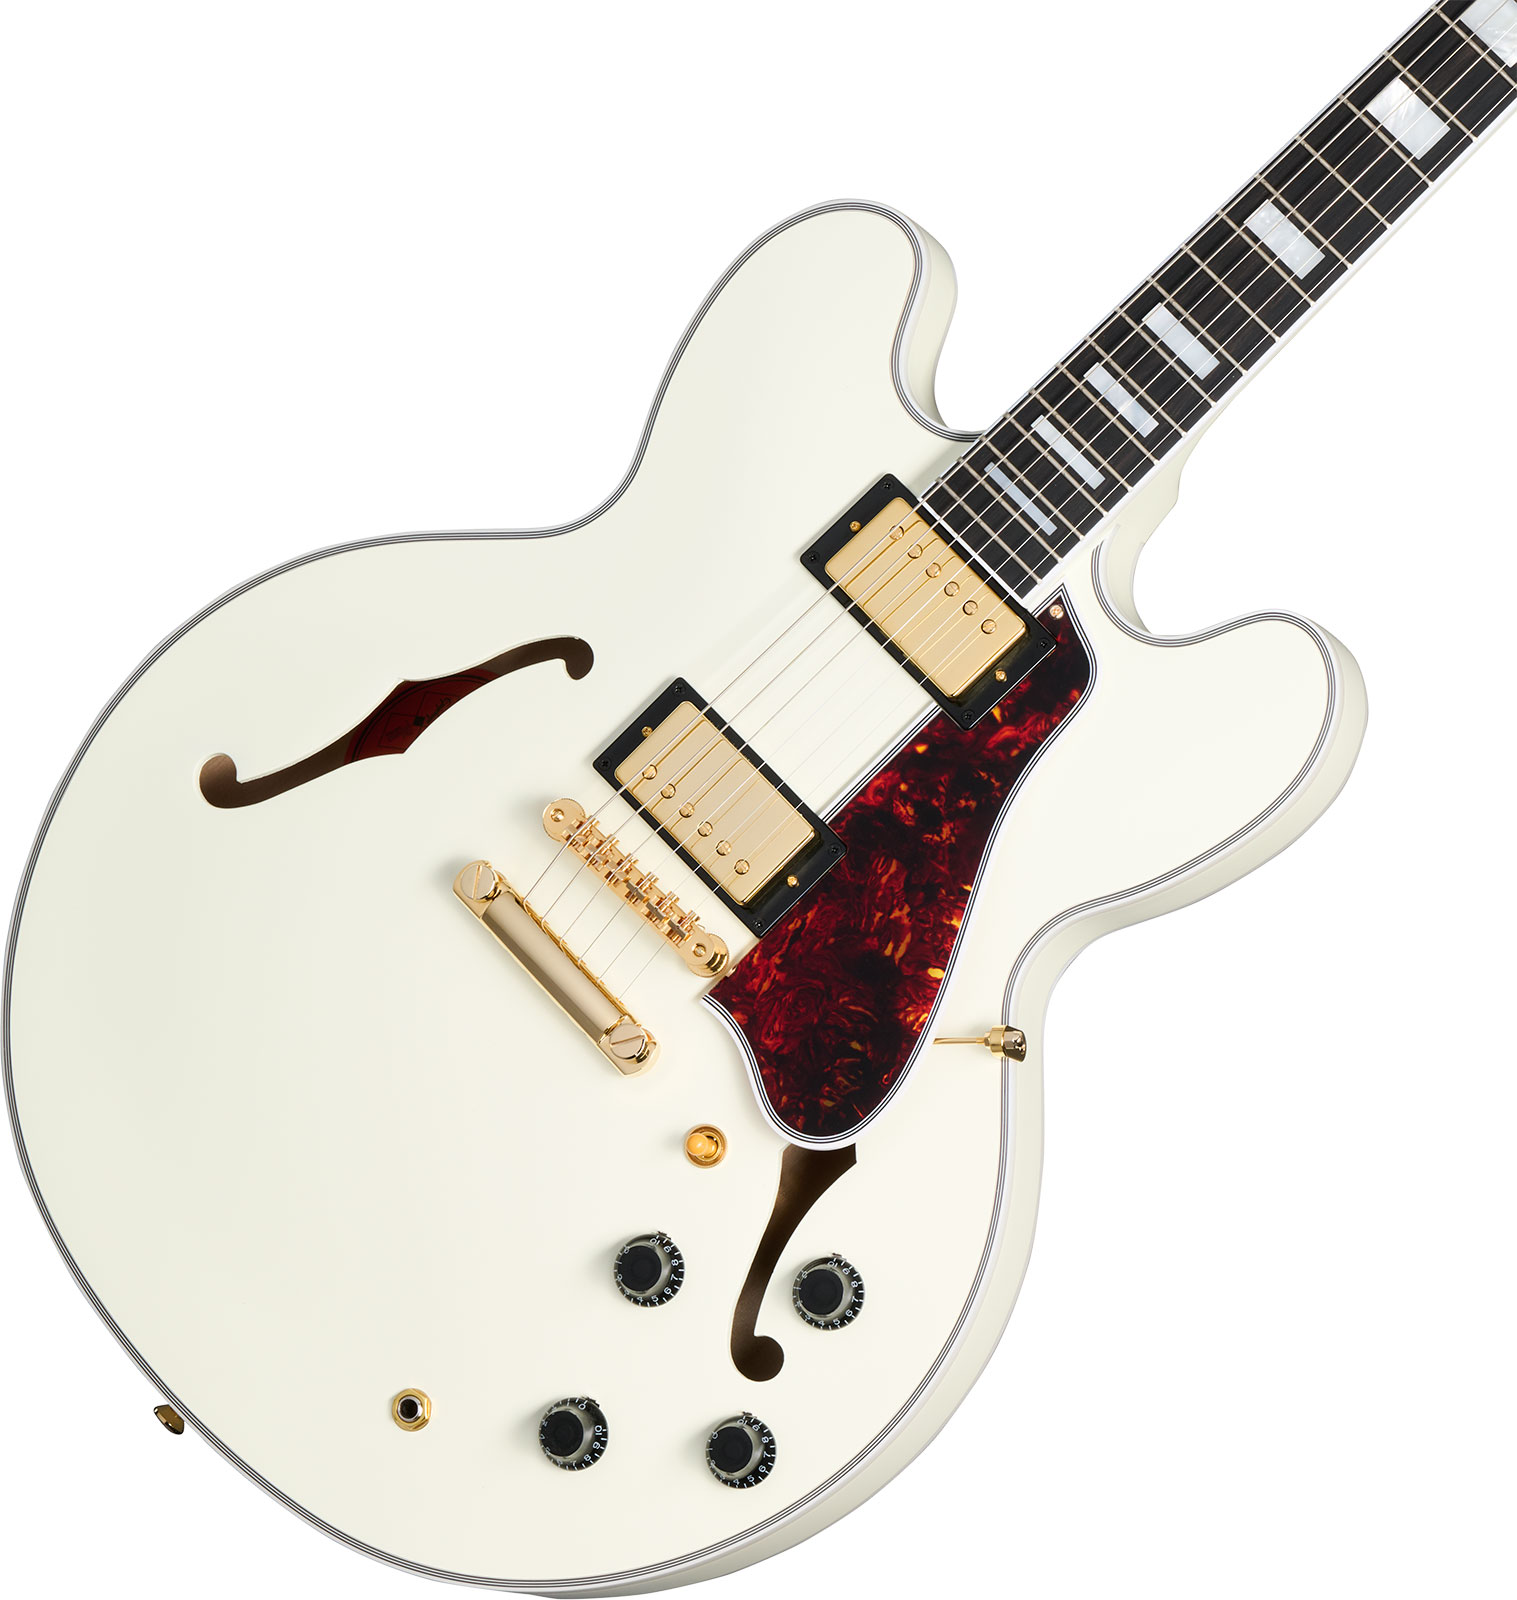 Epiphone Es355 1959 Inspired By 2h Gibson Ht Eb - Vos Classic White - Guitare Électrique 1/2 Caisse - Variation 3